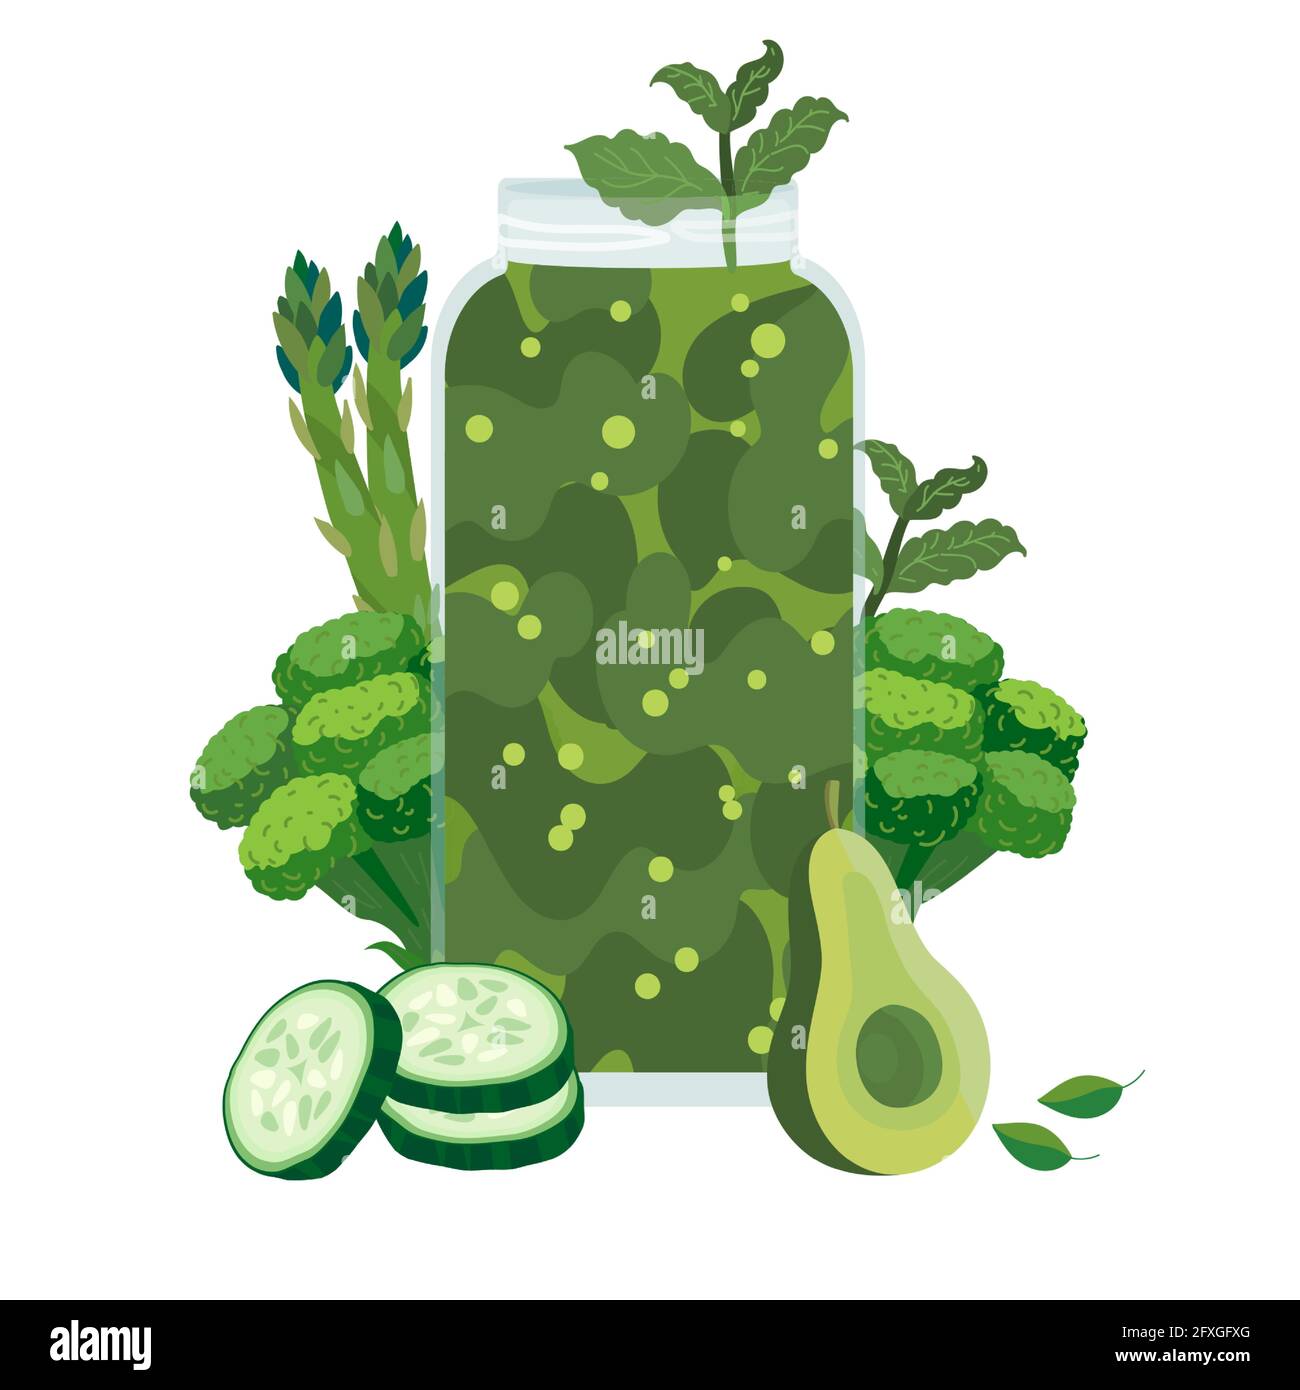 Green smoothie cocktail with asparagus, avocado, cucumber and broccoli. Healthy green drink. Good for vegan, vegeterian, keto, detox an smoothie diets Stock Vector